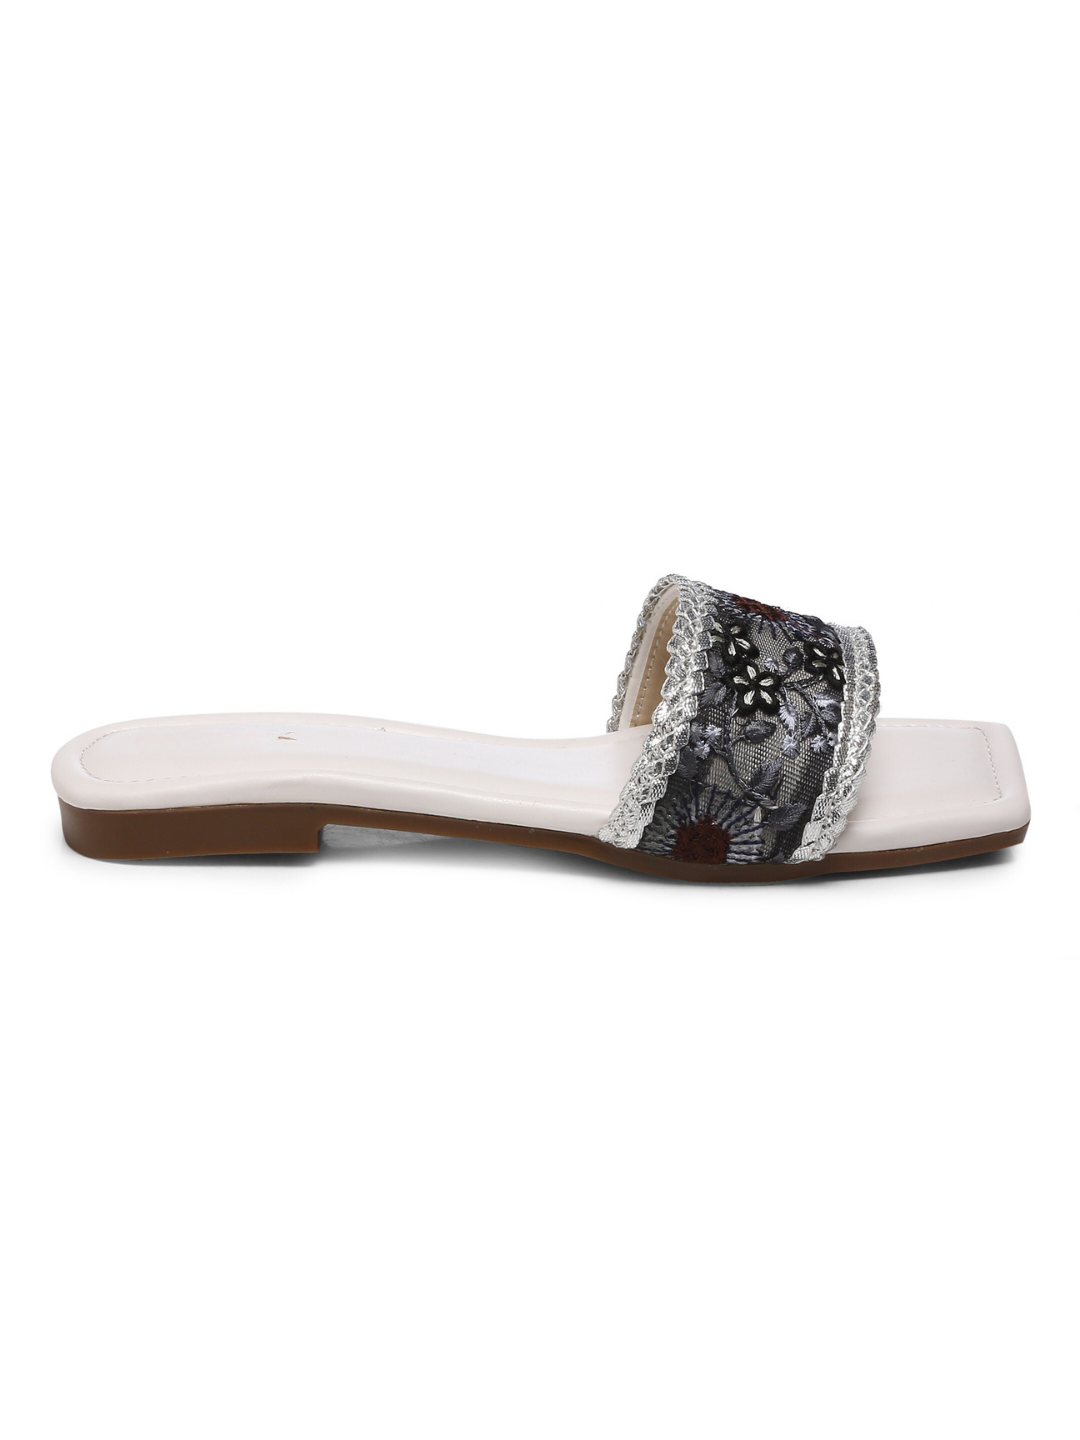 GNIST BlackWhite Embroidered Flats